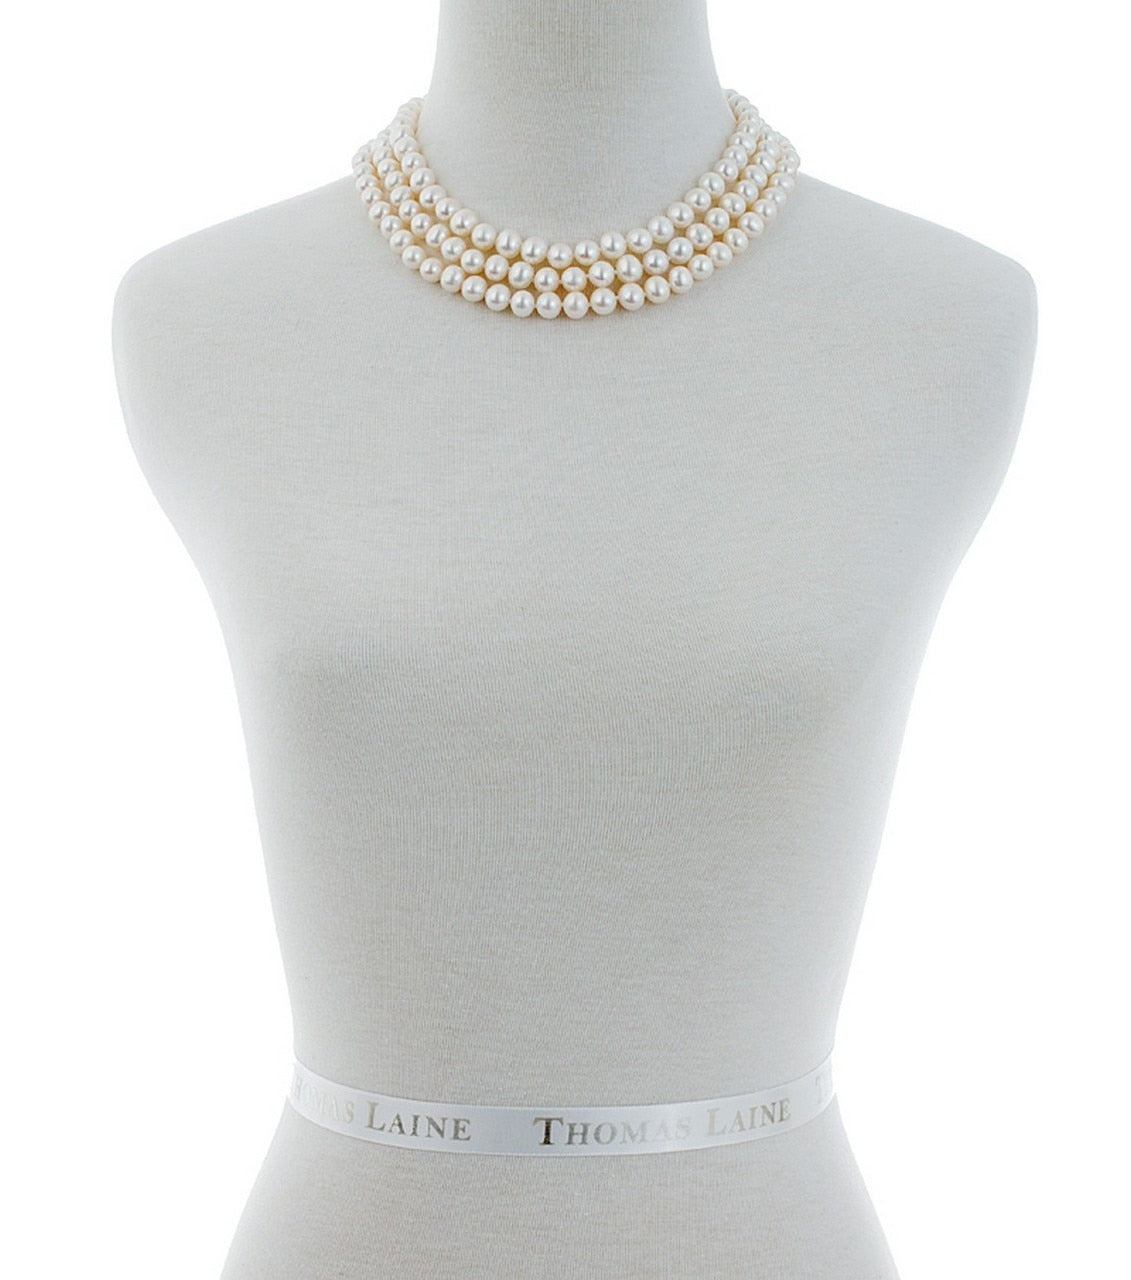 Three Strand Cultured Freshwater Pearl Necklace | Thomas Laine Jewelry